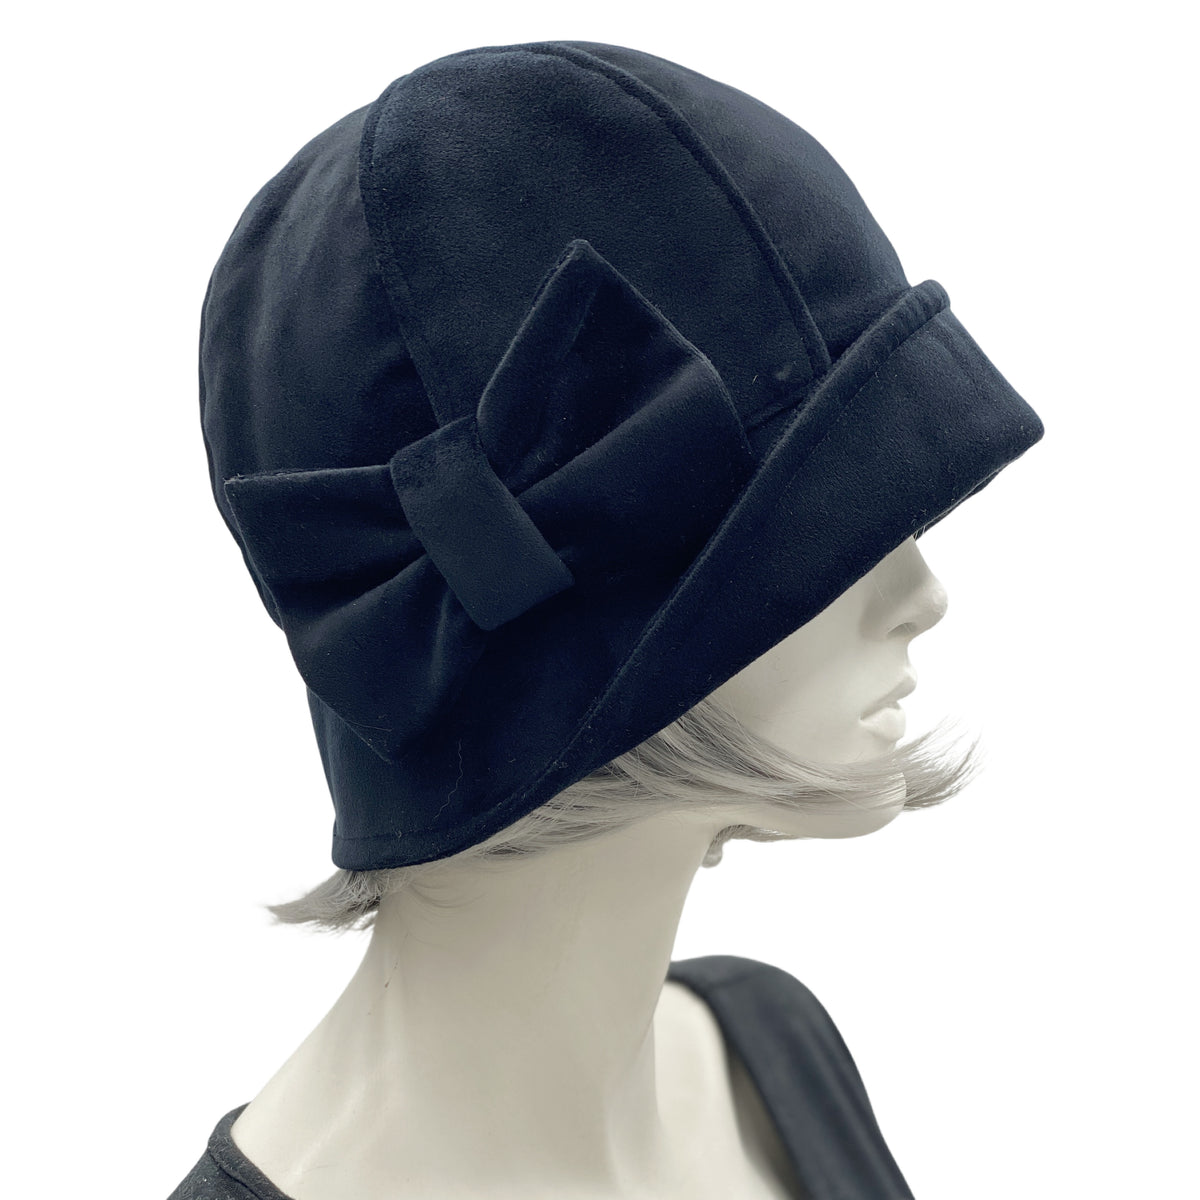 Velvet 1920's Style Cloche Hat with Bow in Several Color Options | The